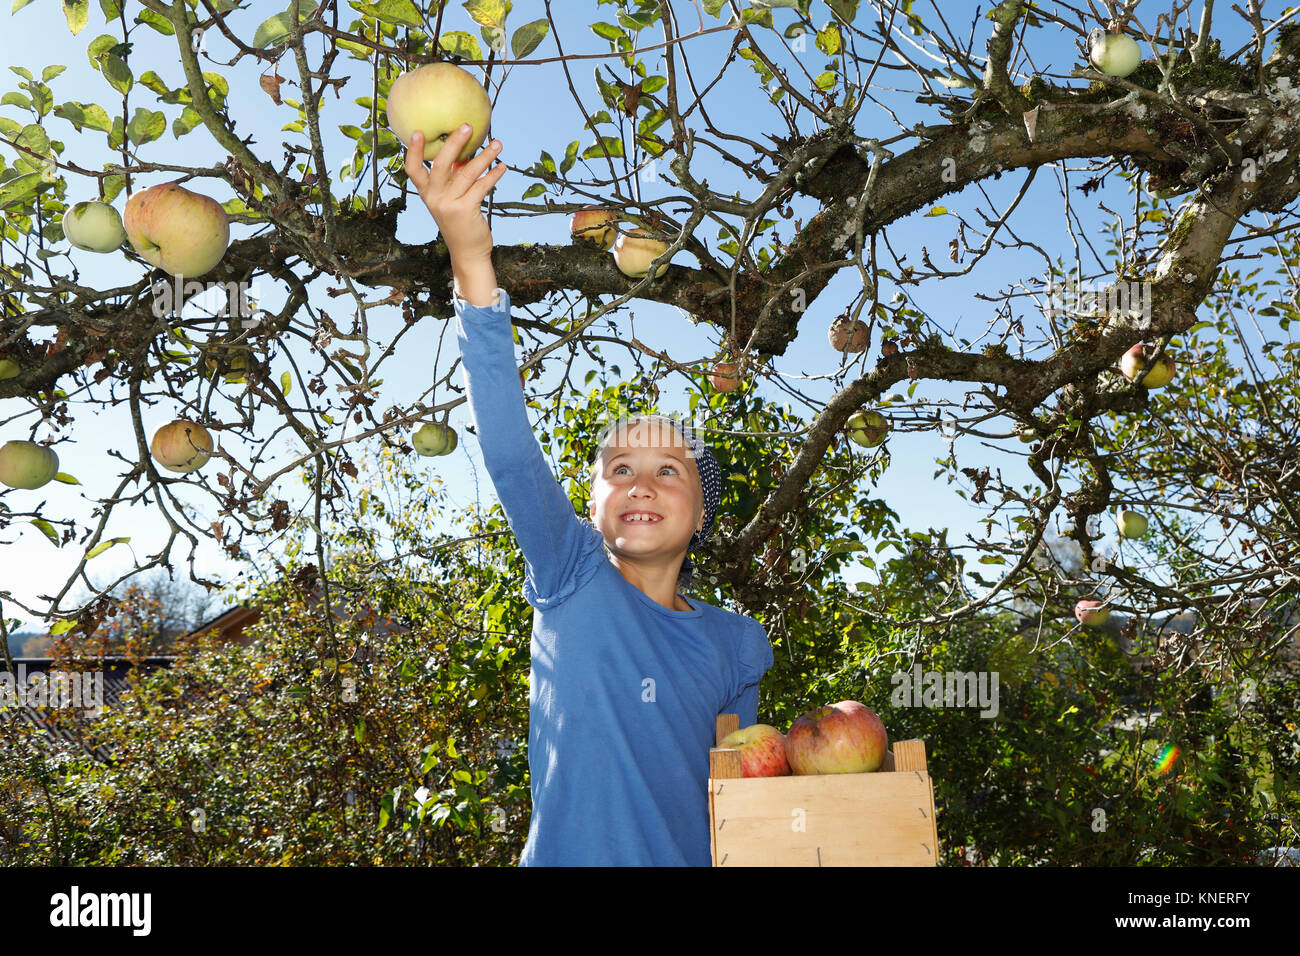 Young girl picking apple from tree Stock Photo